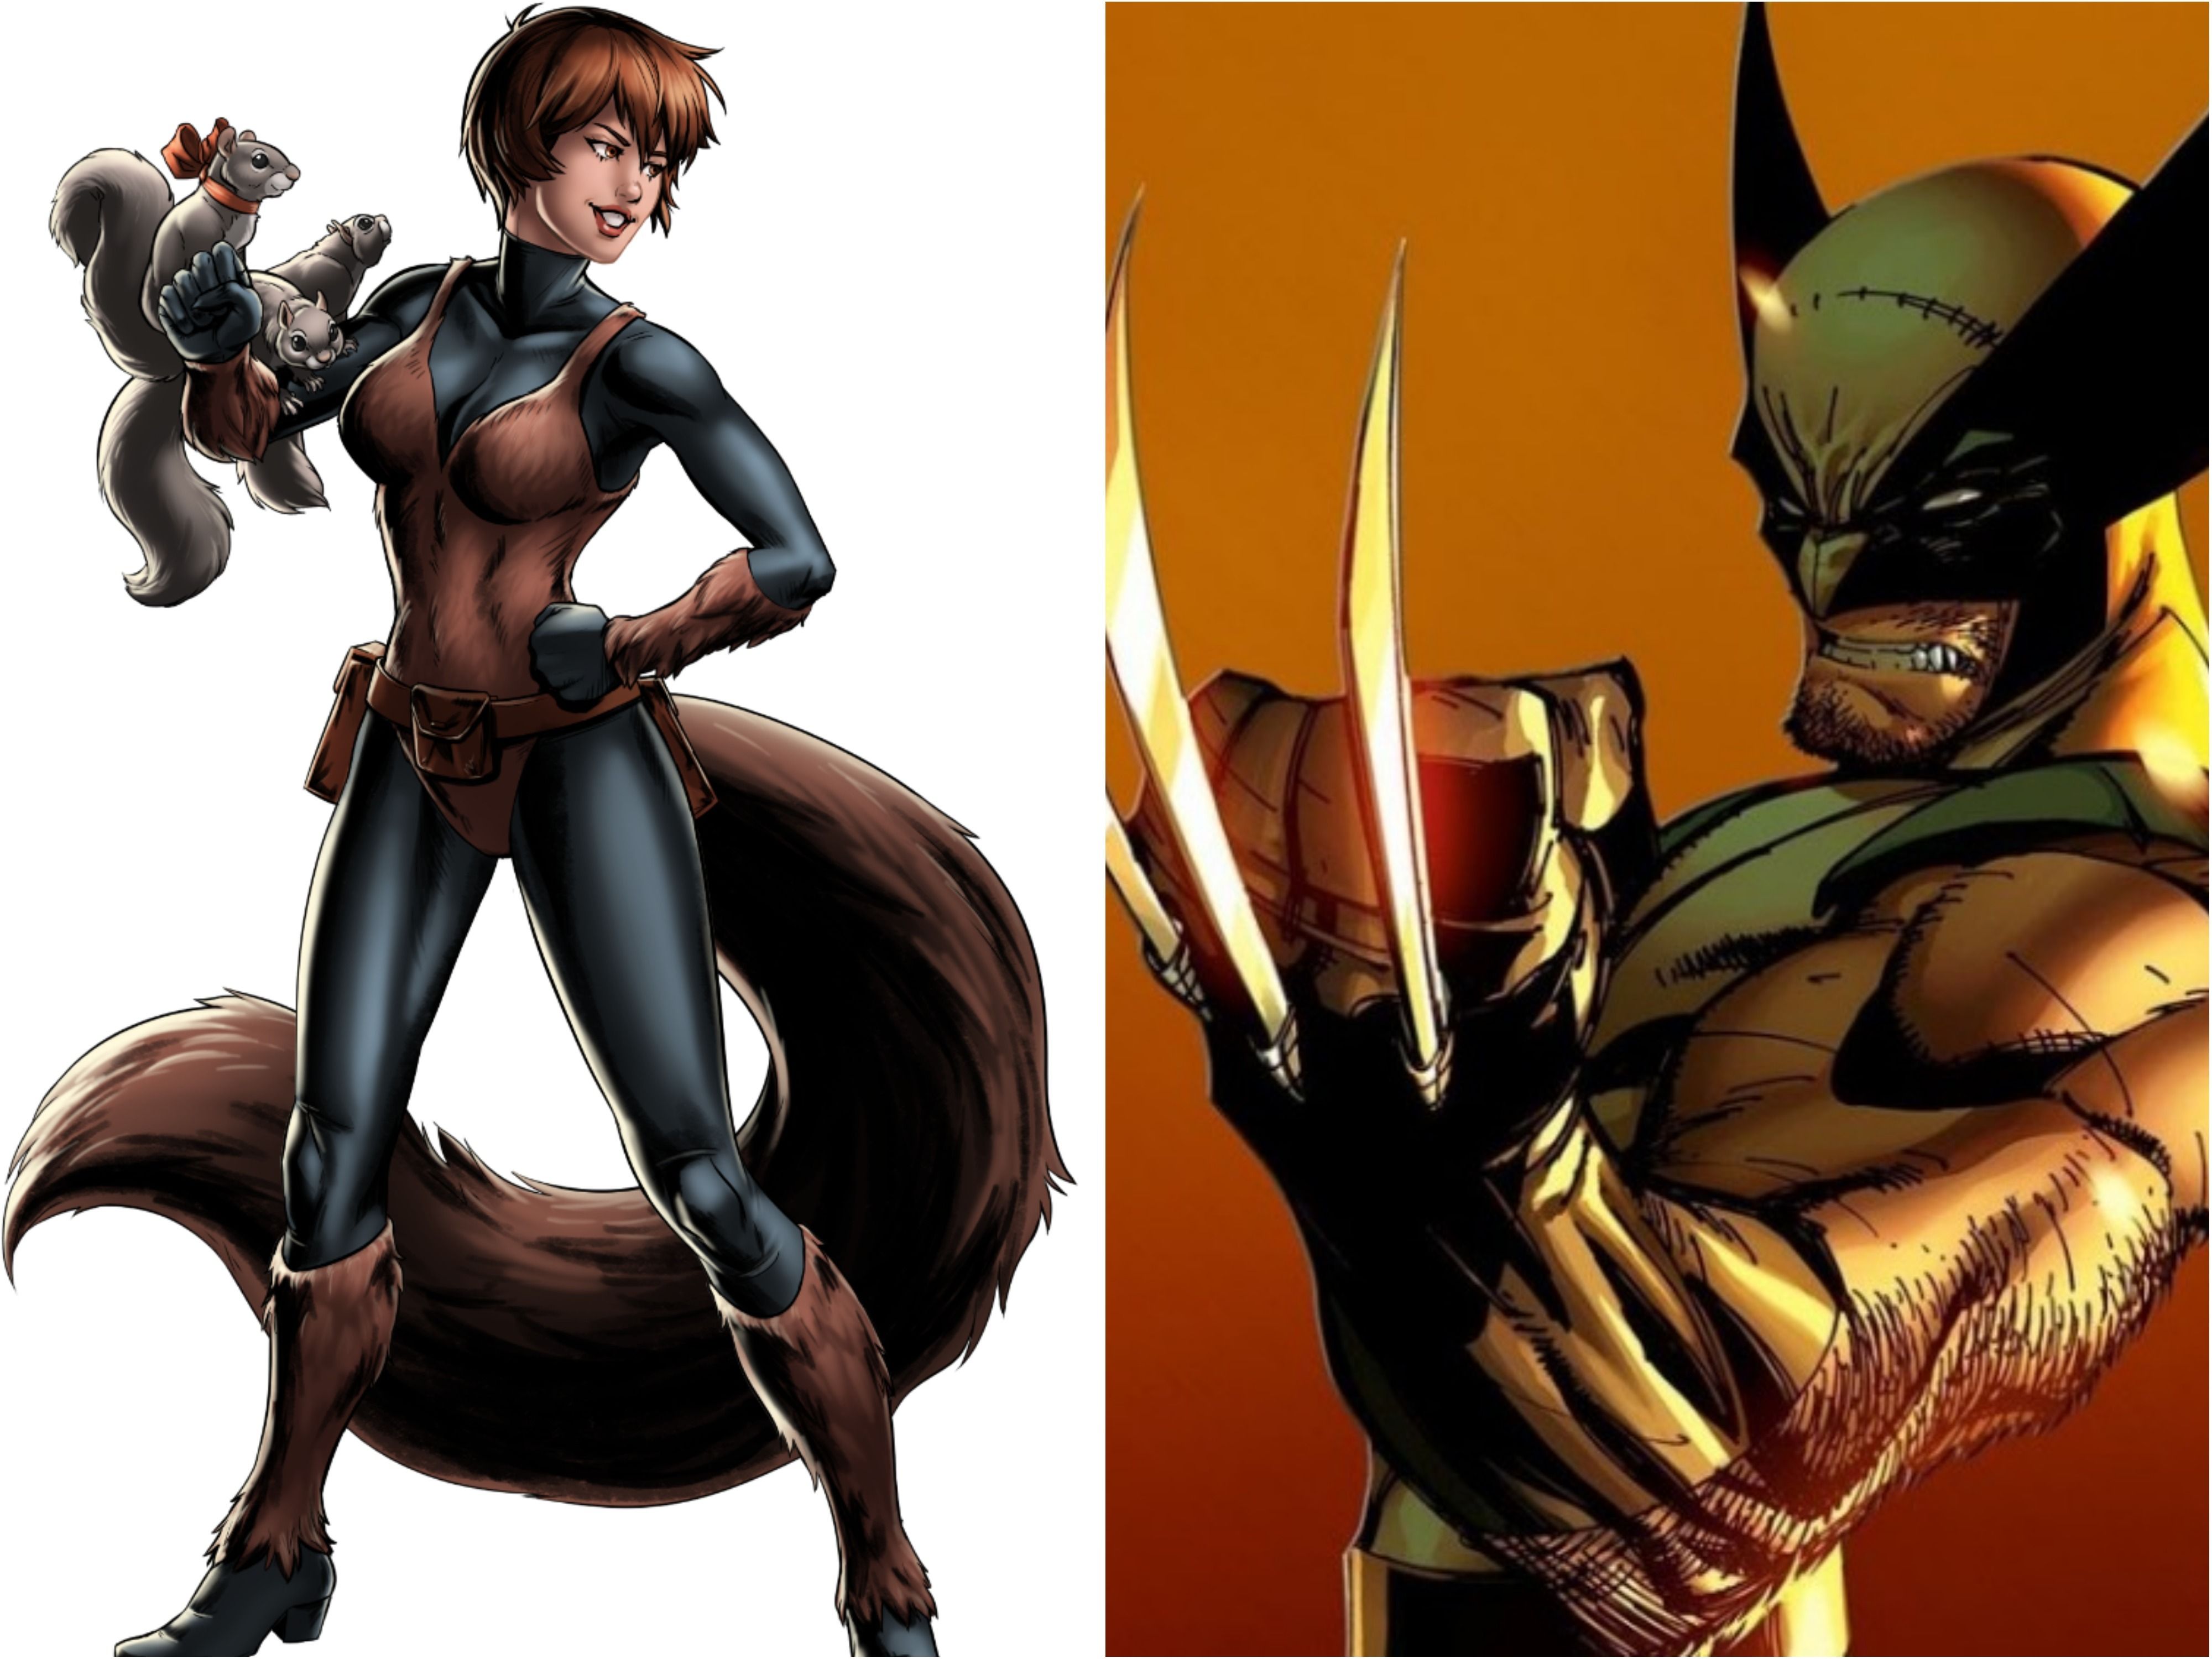 Wolverine and Squirrel Girl